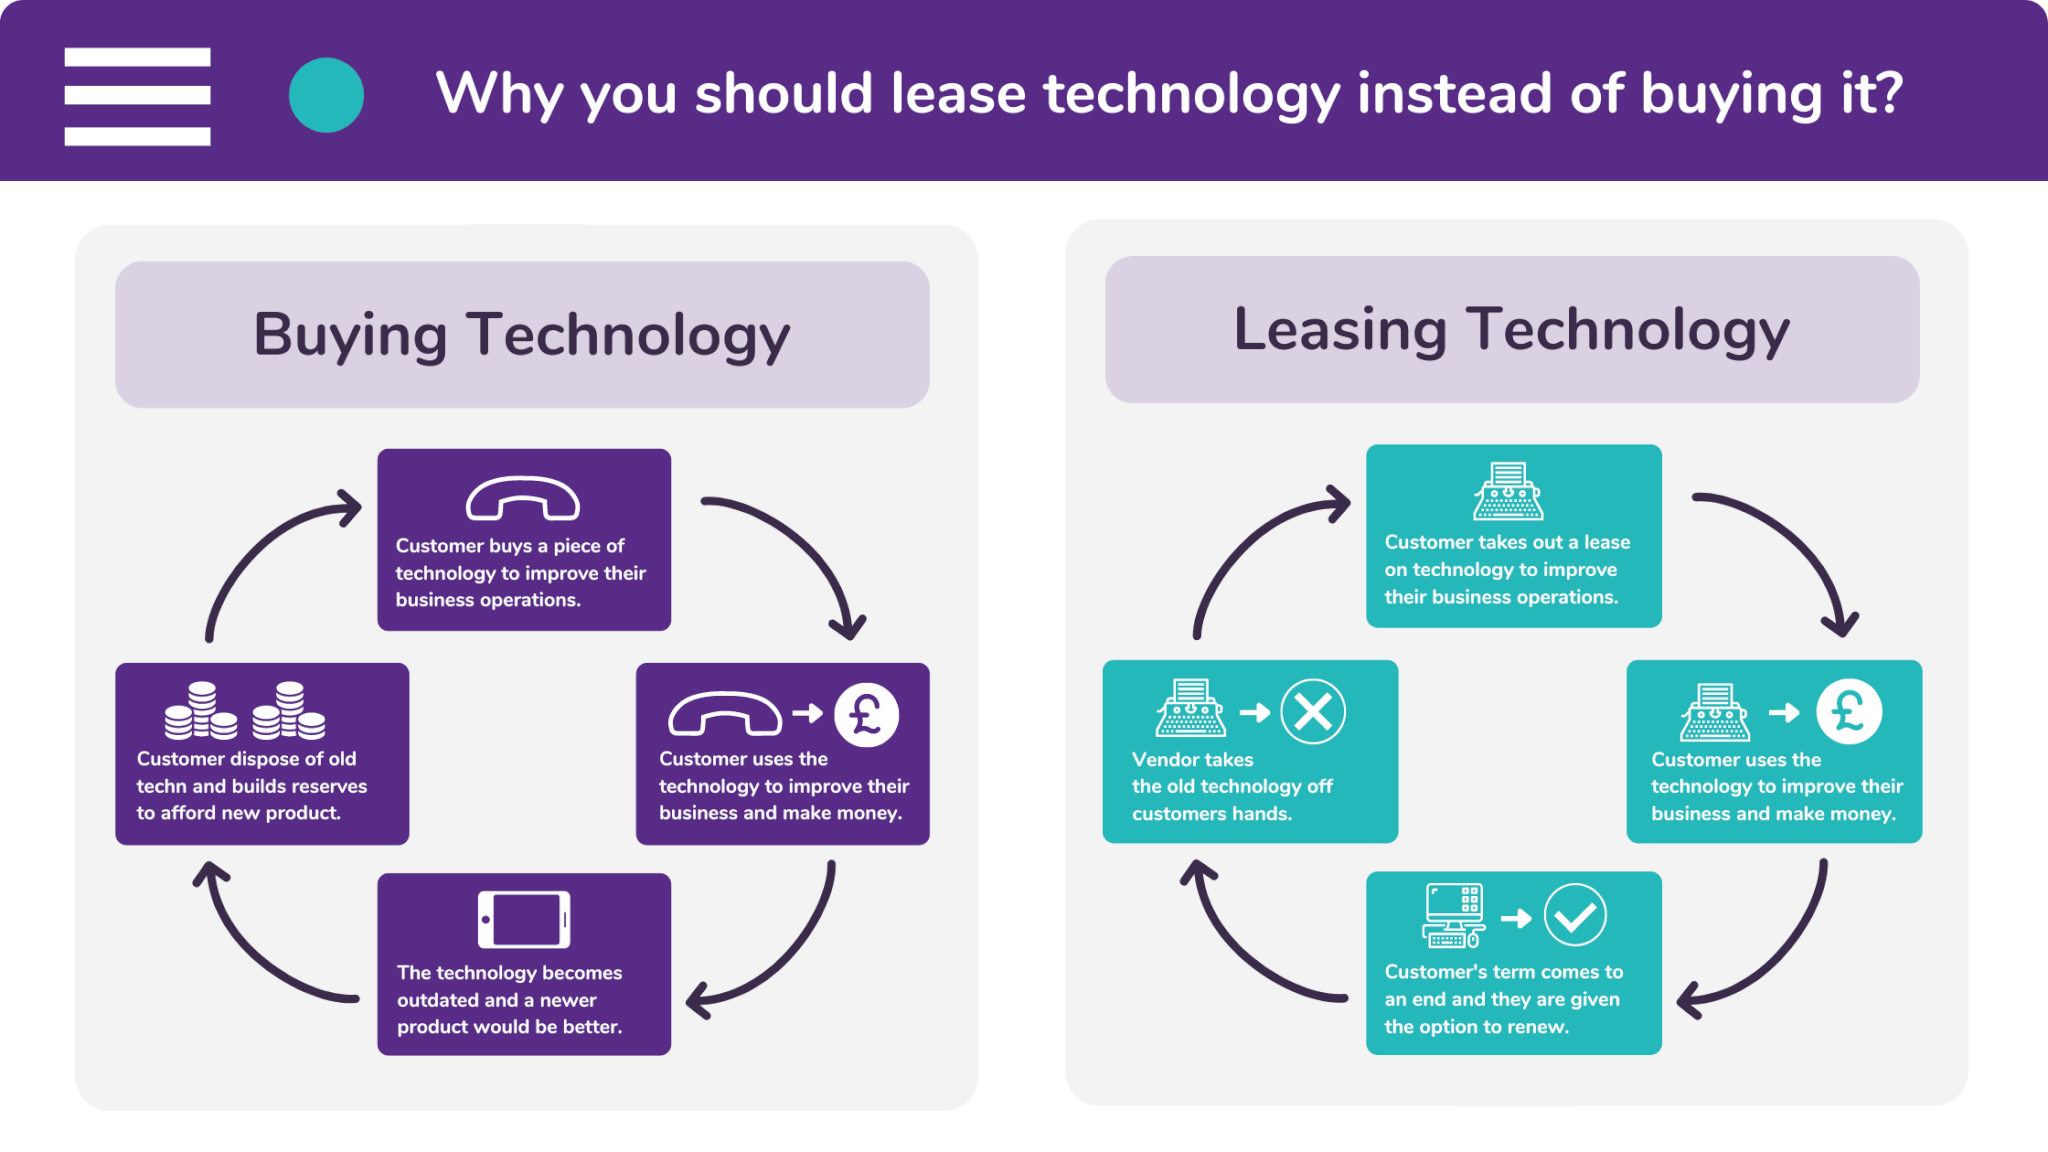 You should lease technology products because they are classed as soft assets.